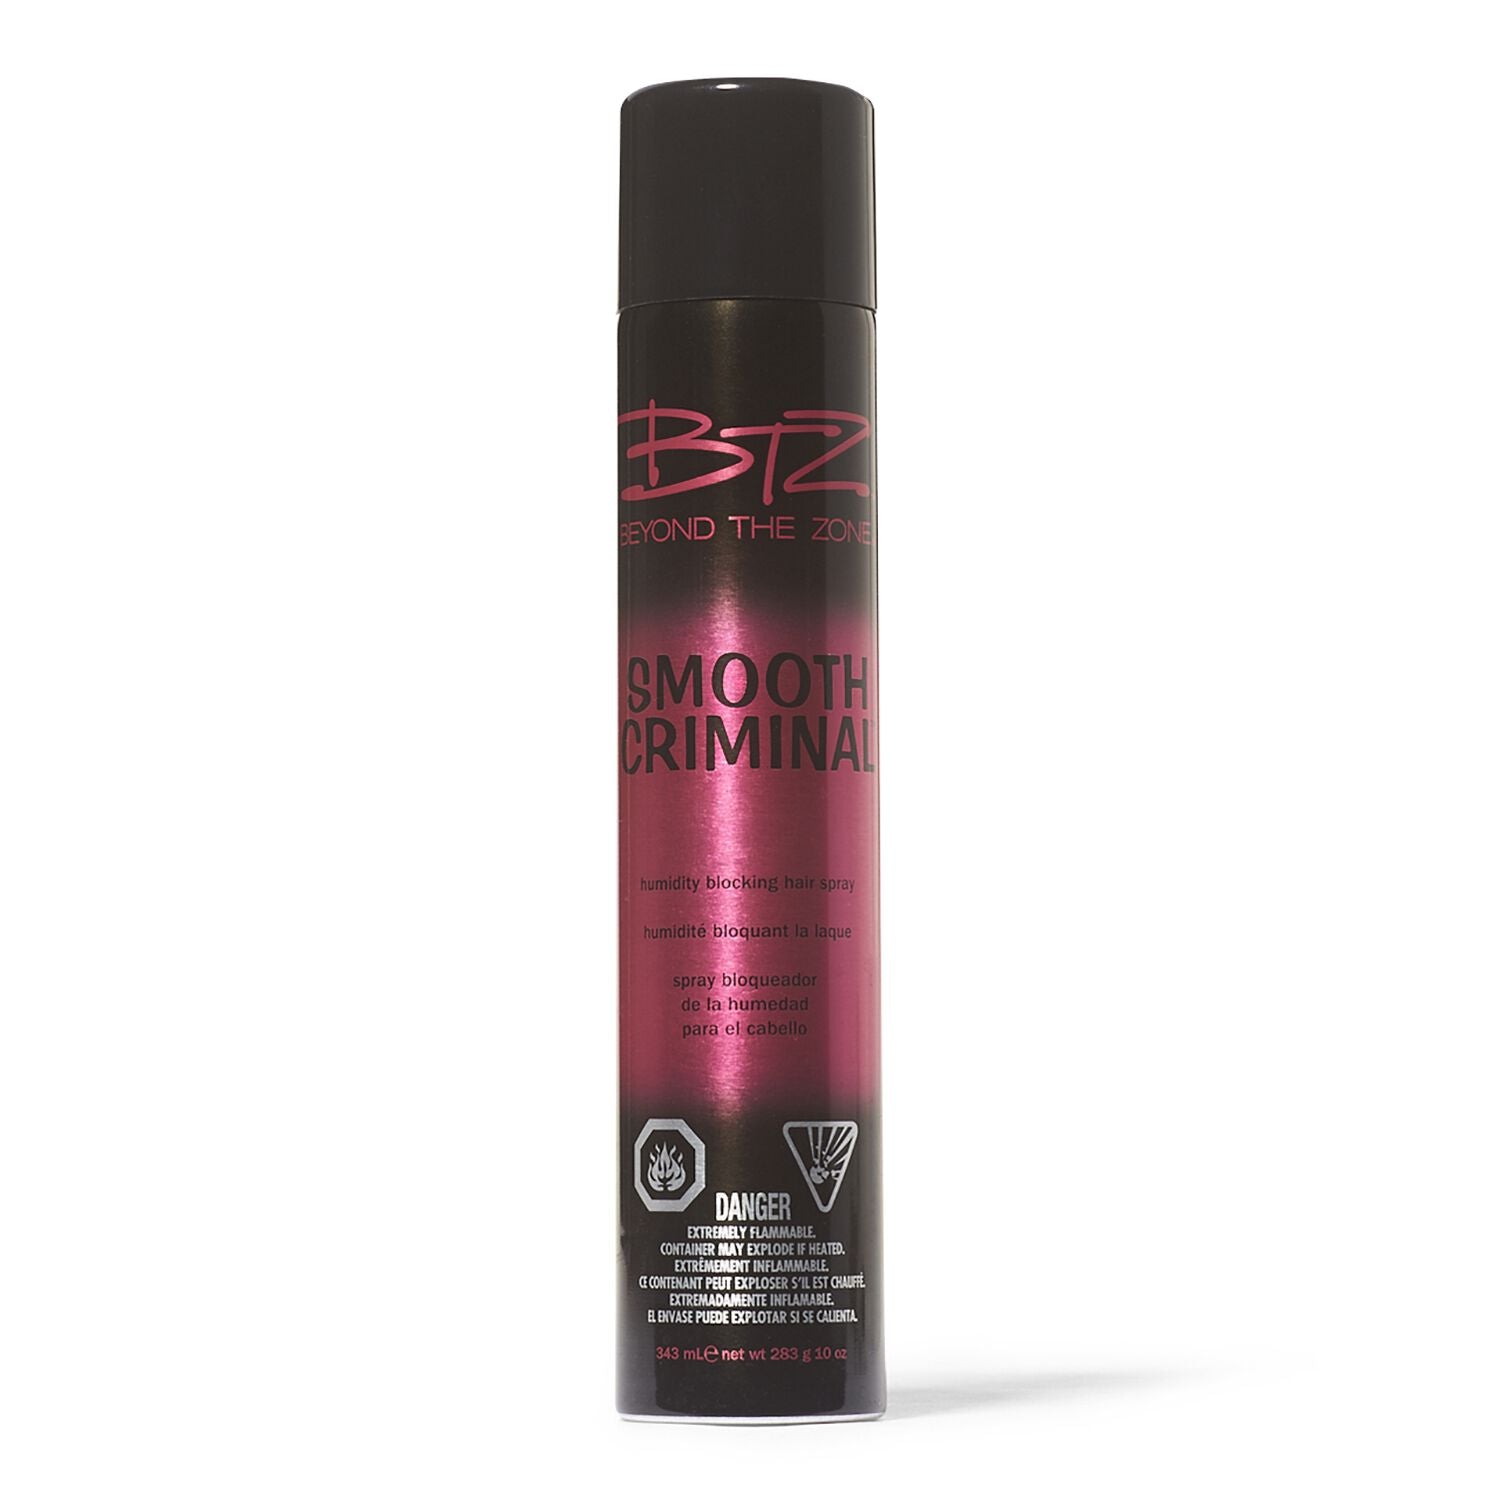 Smooth Criminal  by   Beyond the Zone Humidity Blocking Hair Spray